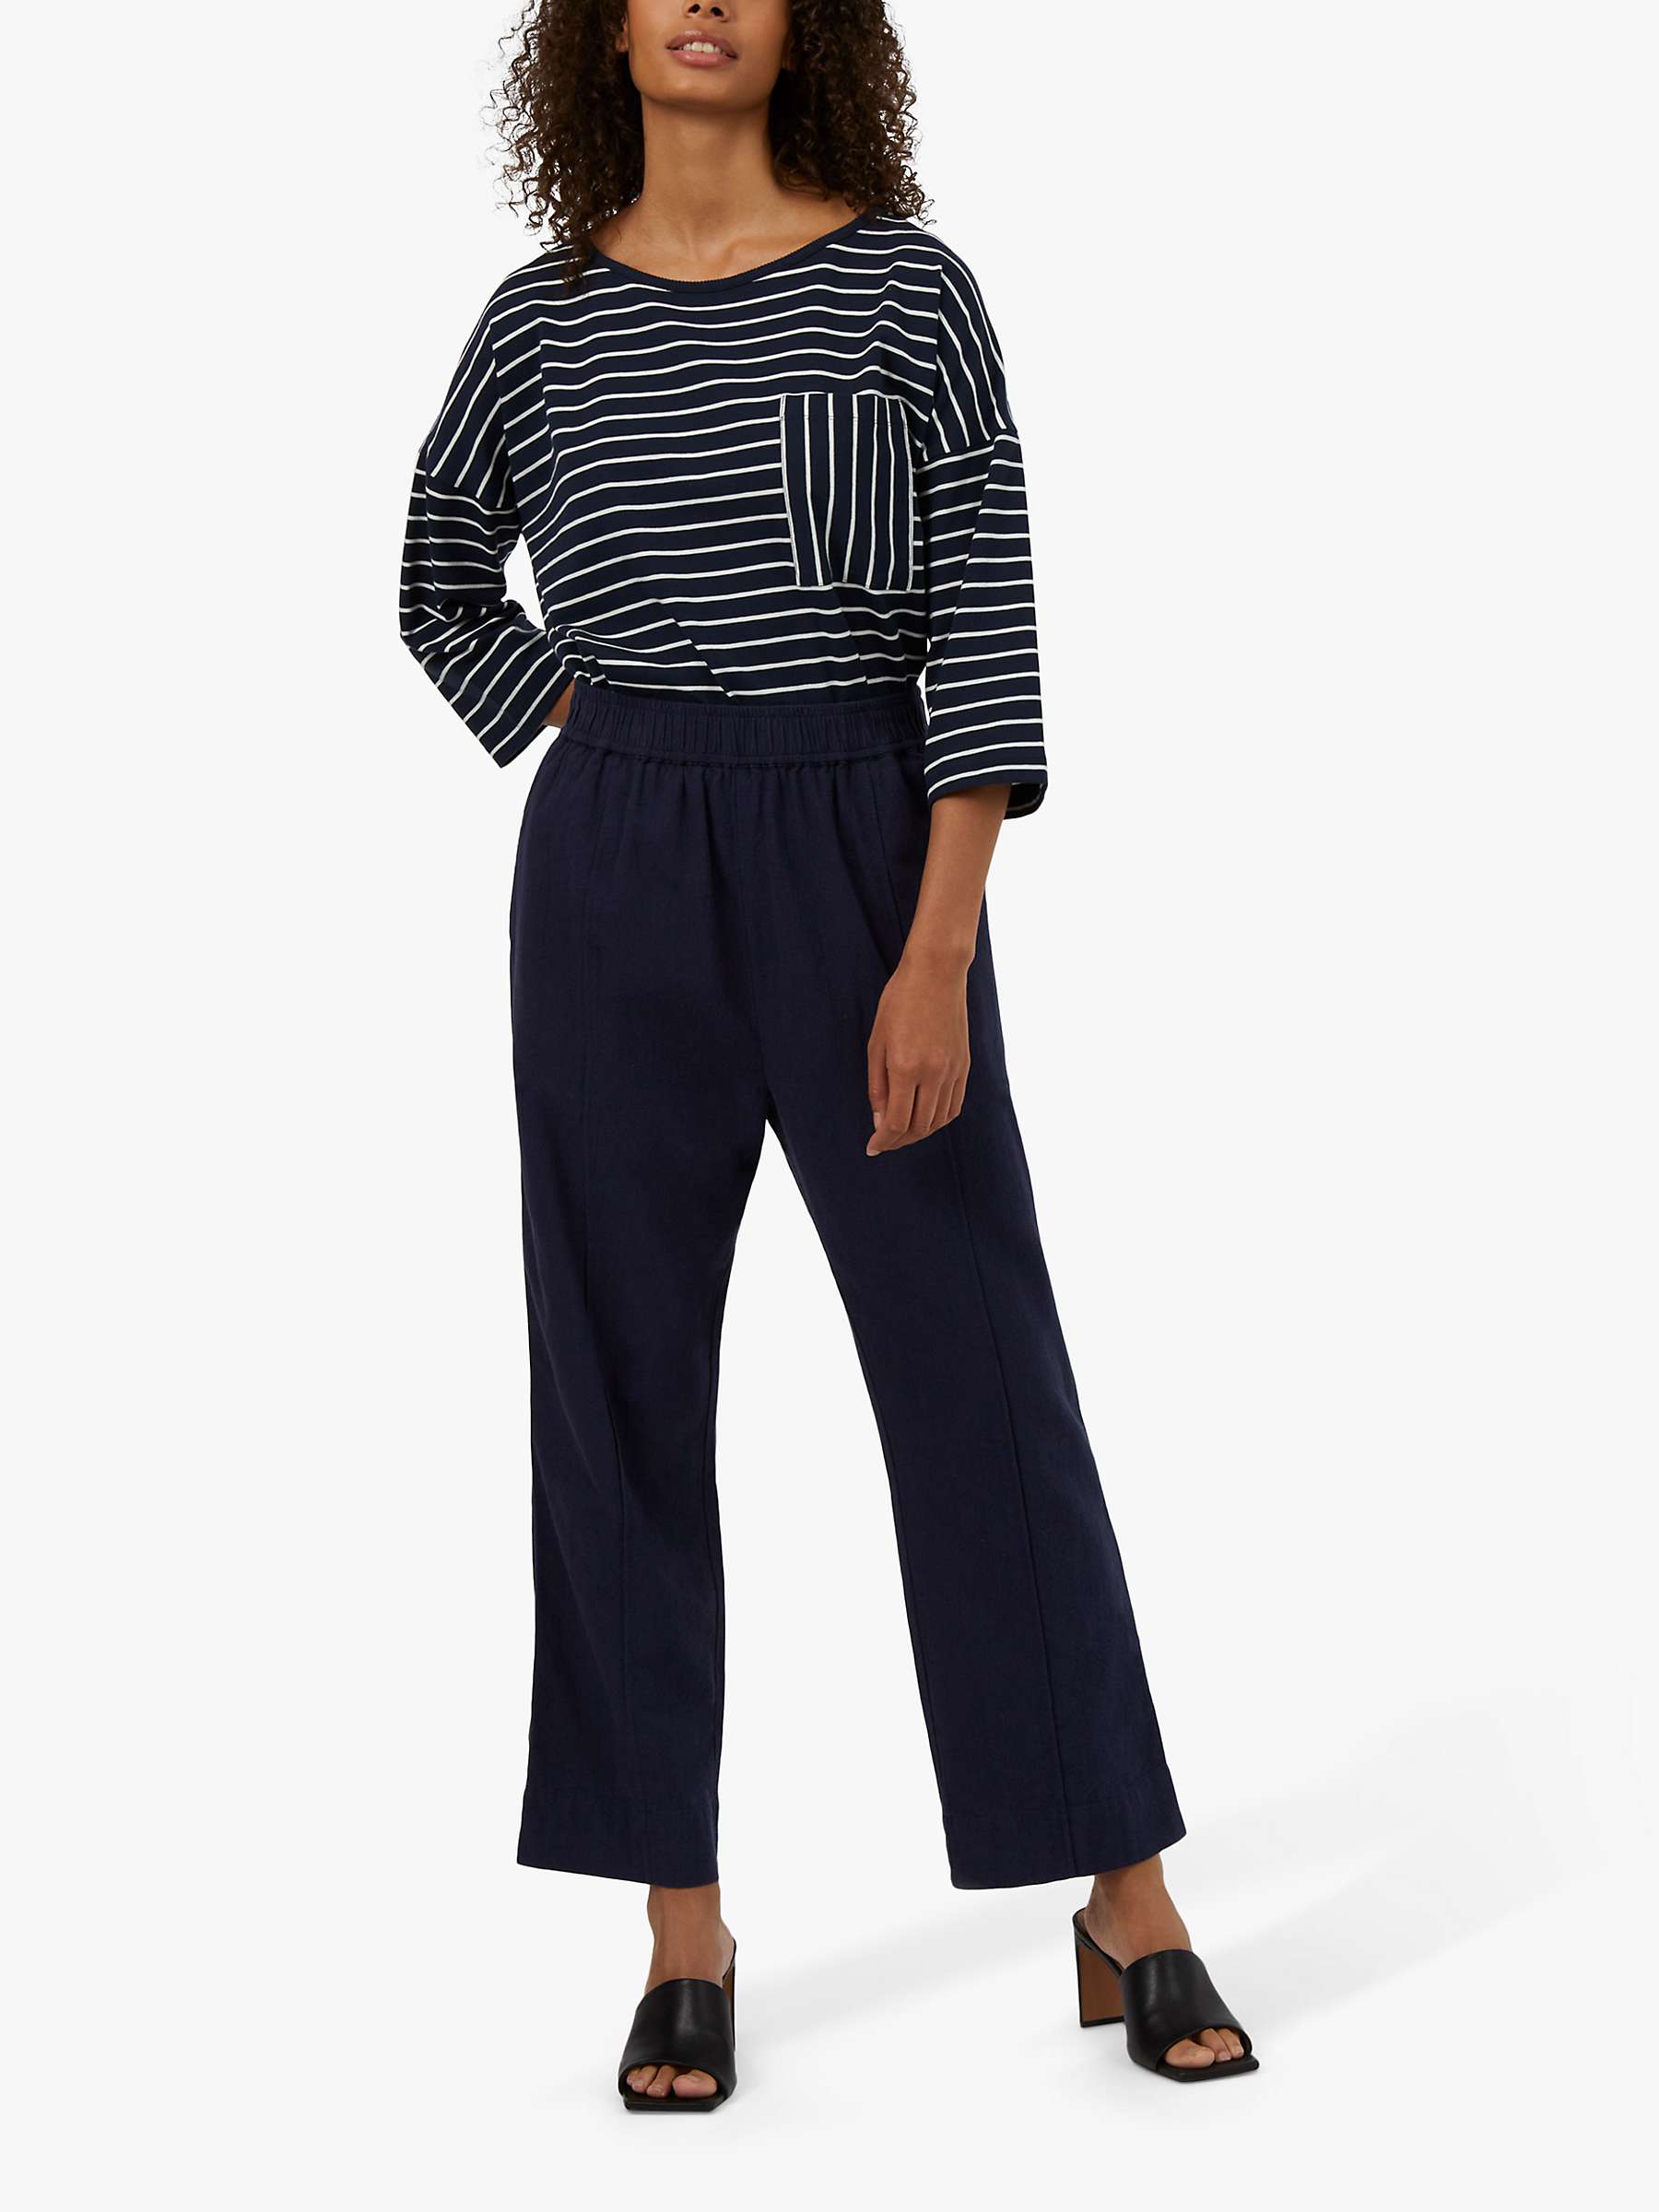 Buy Great Plains Crinkle Cotton Trousers, Navy Online at johnlewis.com